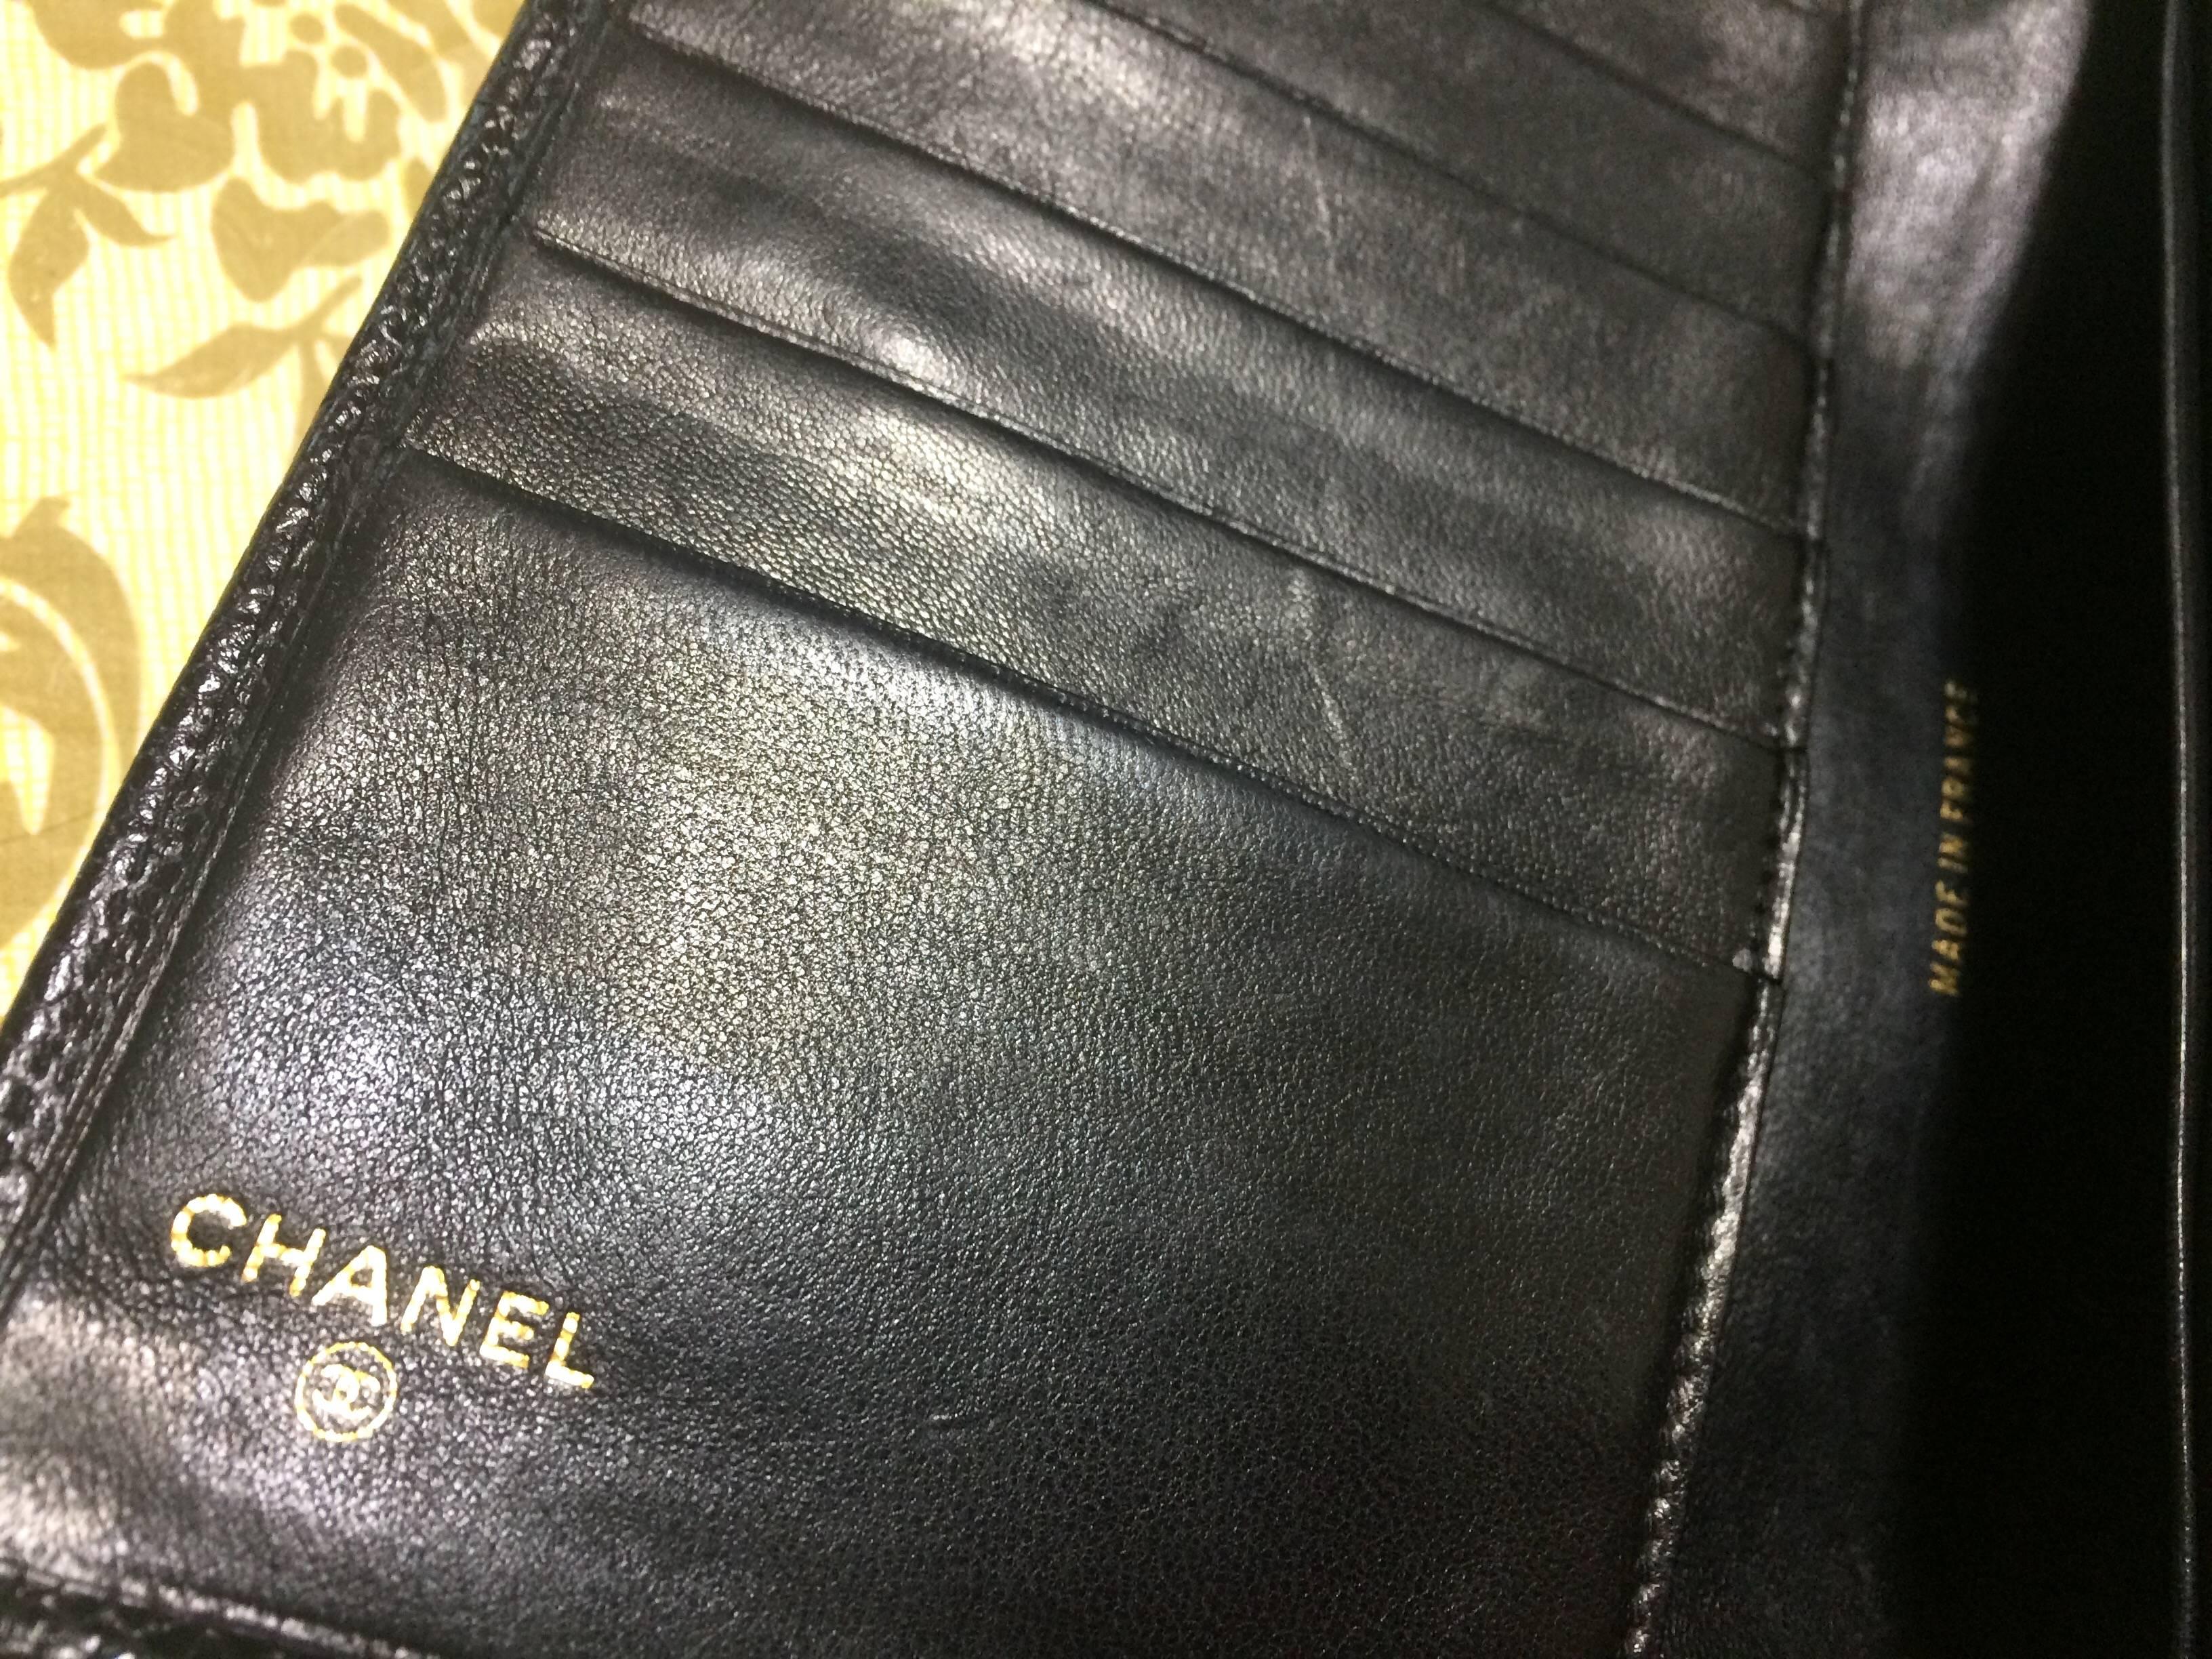 Vintage CHANEL black caviar leather wallet with stitches and gold tone CC motif. 3